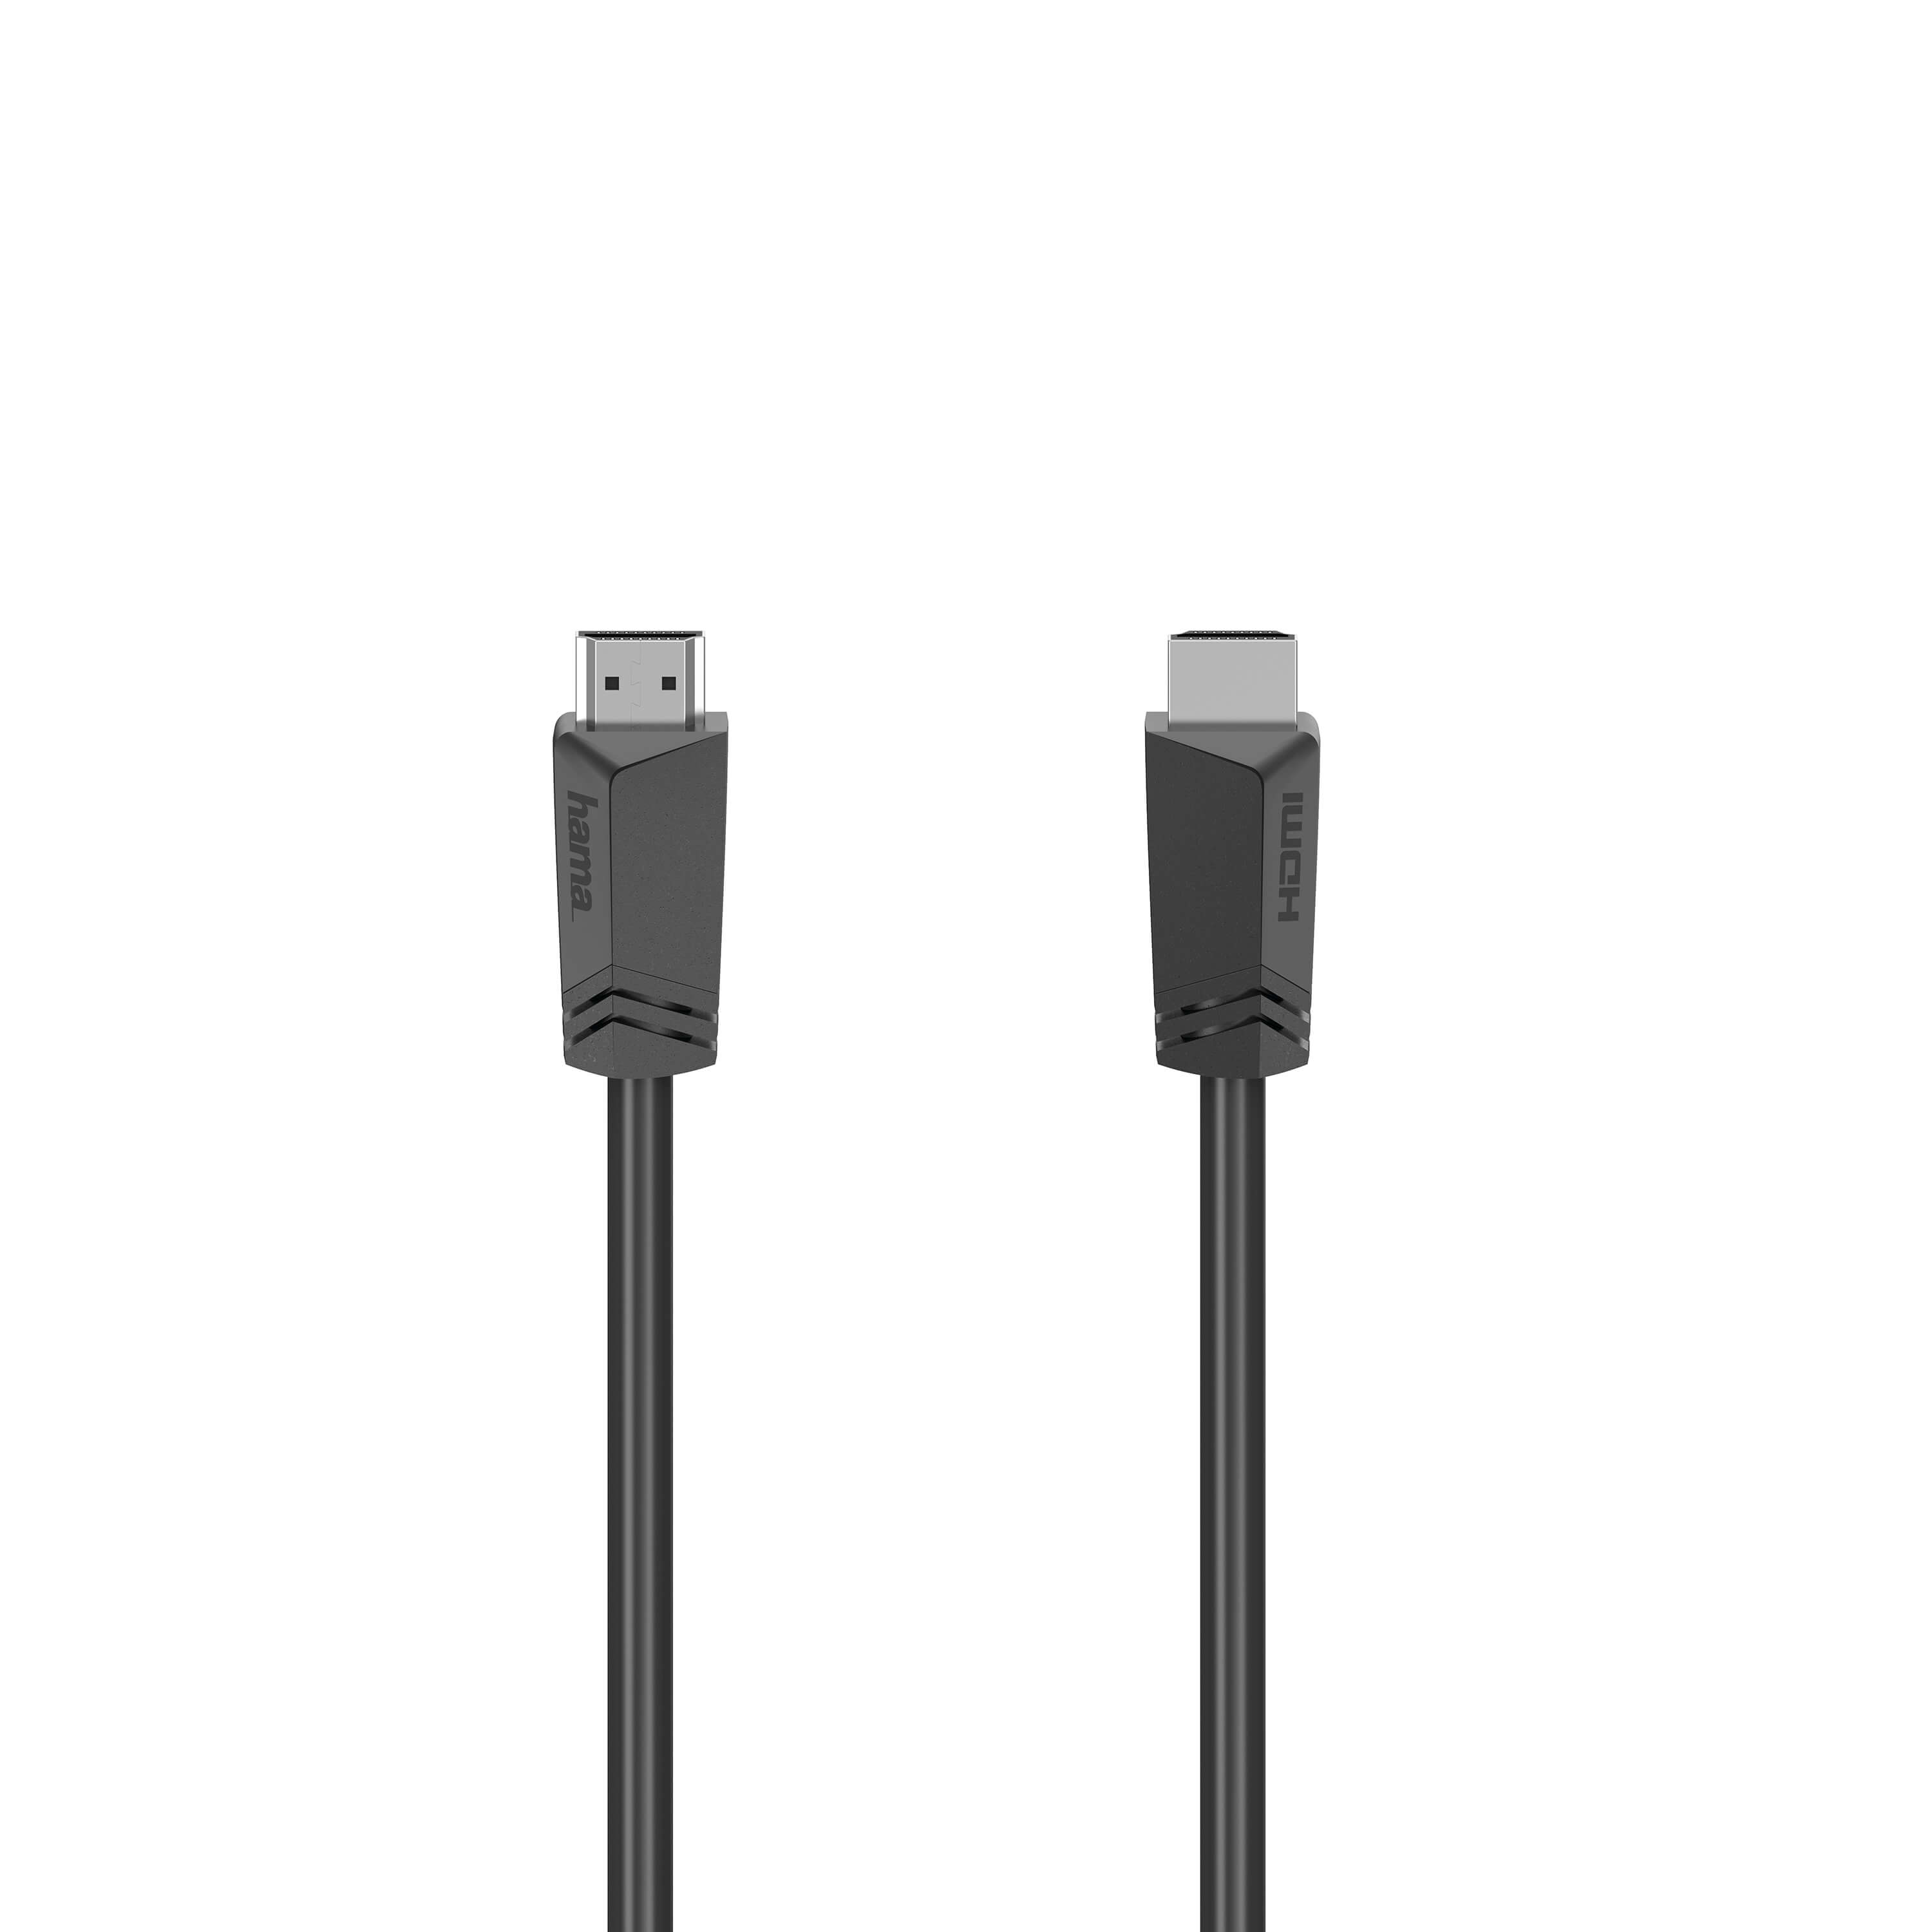 HAMA HDI Cable Ethernet Black 5m